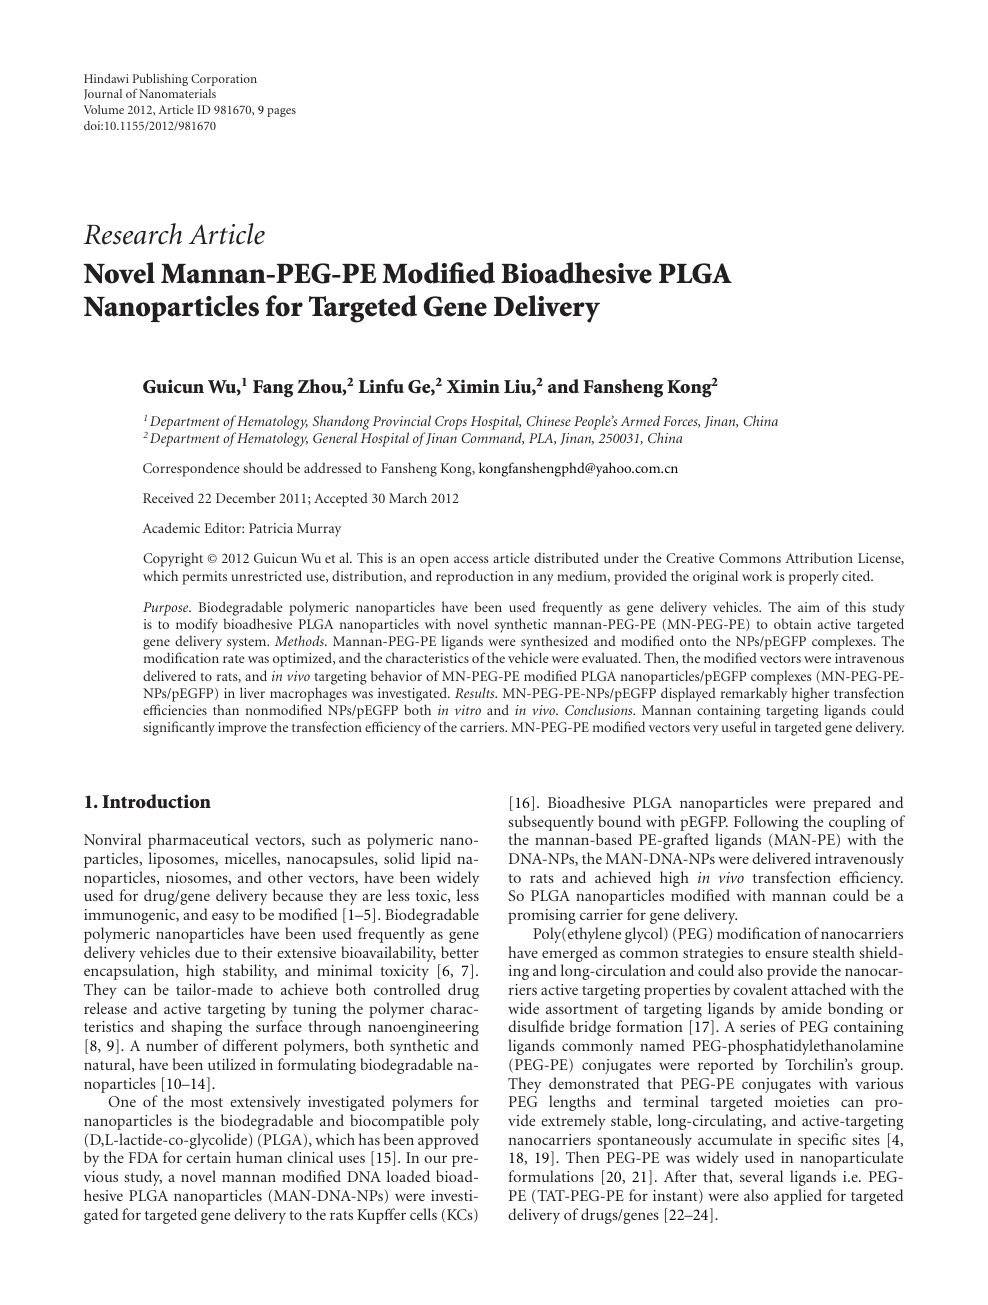 Novel Mannan Peg Pe Modified Bioadhesive Plga Nanoparticles For Targeted Gene Delivery Topic Of Research Paper In Nano Technology Download Scholarly Article Pdf And Read For Free On Cyberleninka Open Science Hub